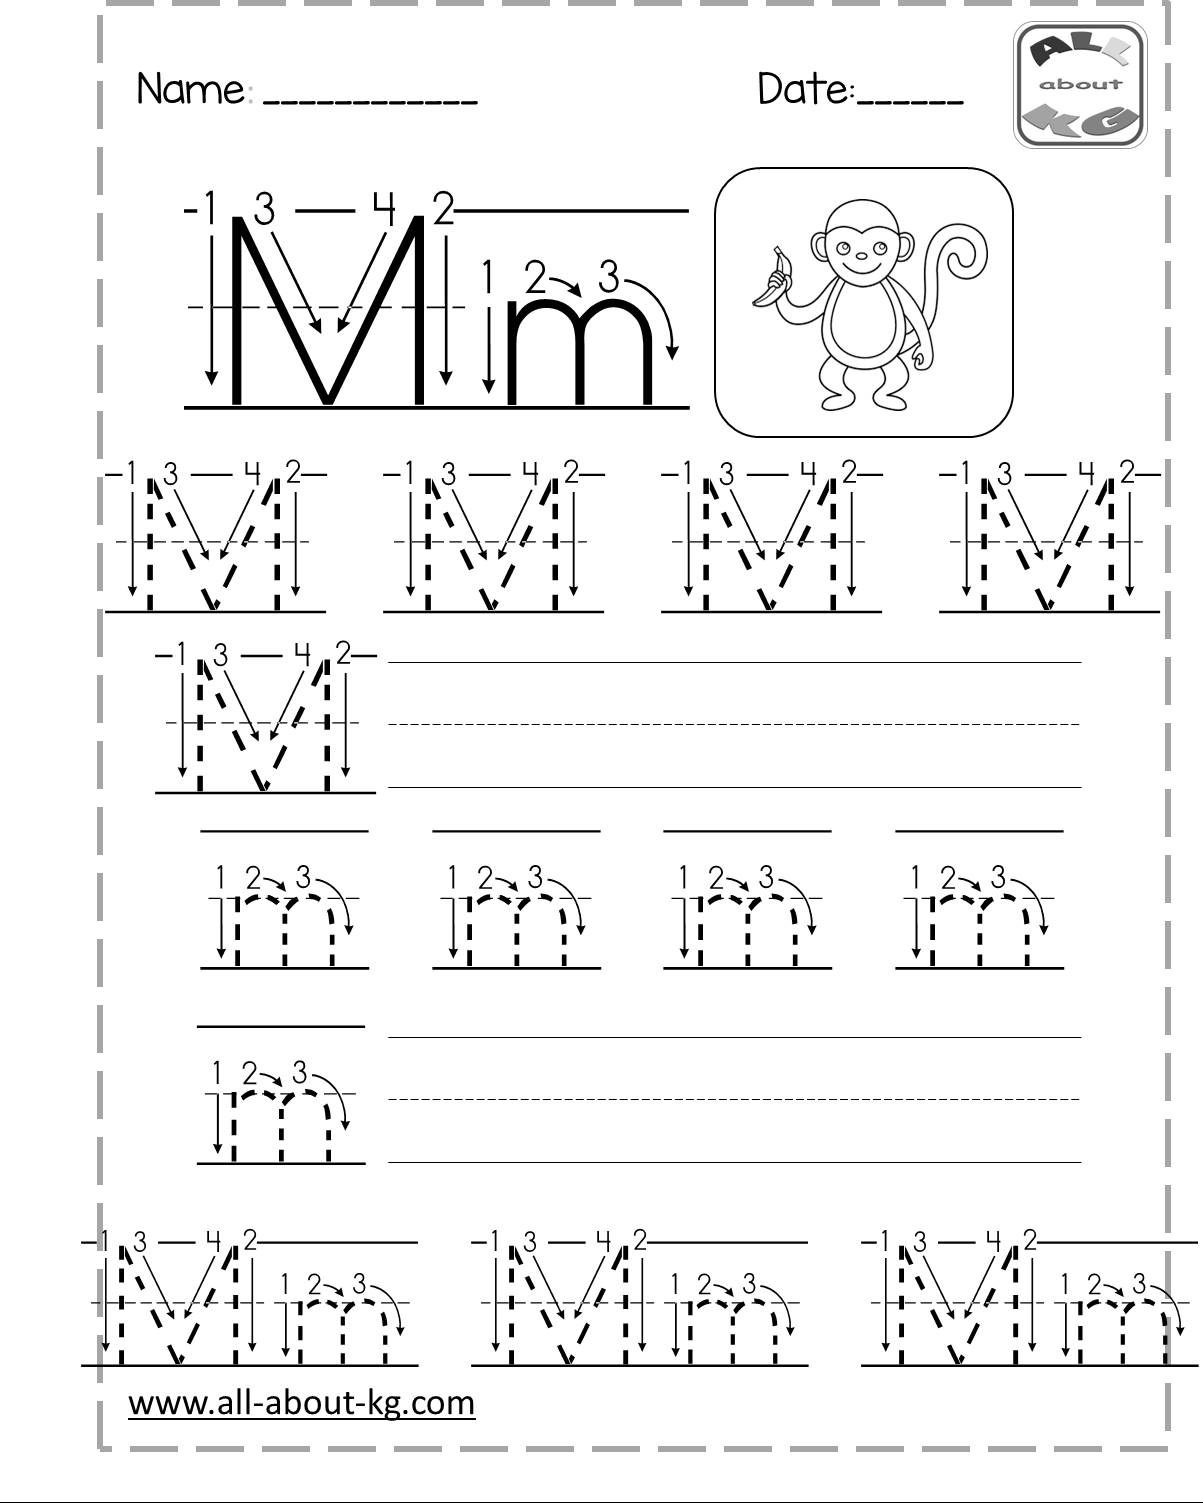 letter-mm-all-about-kg